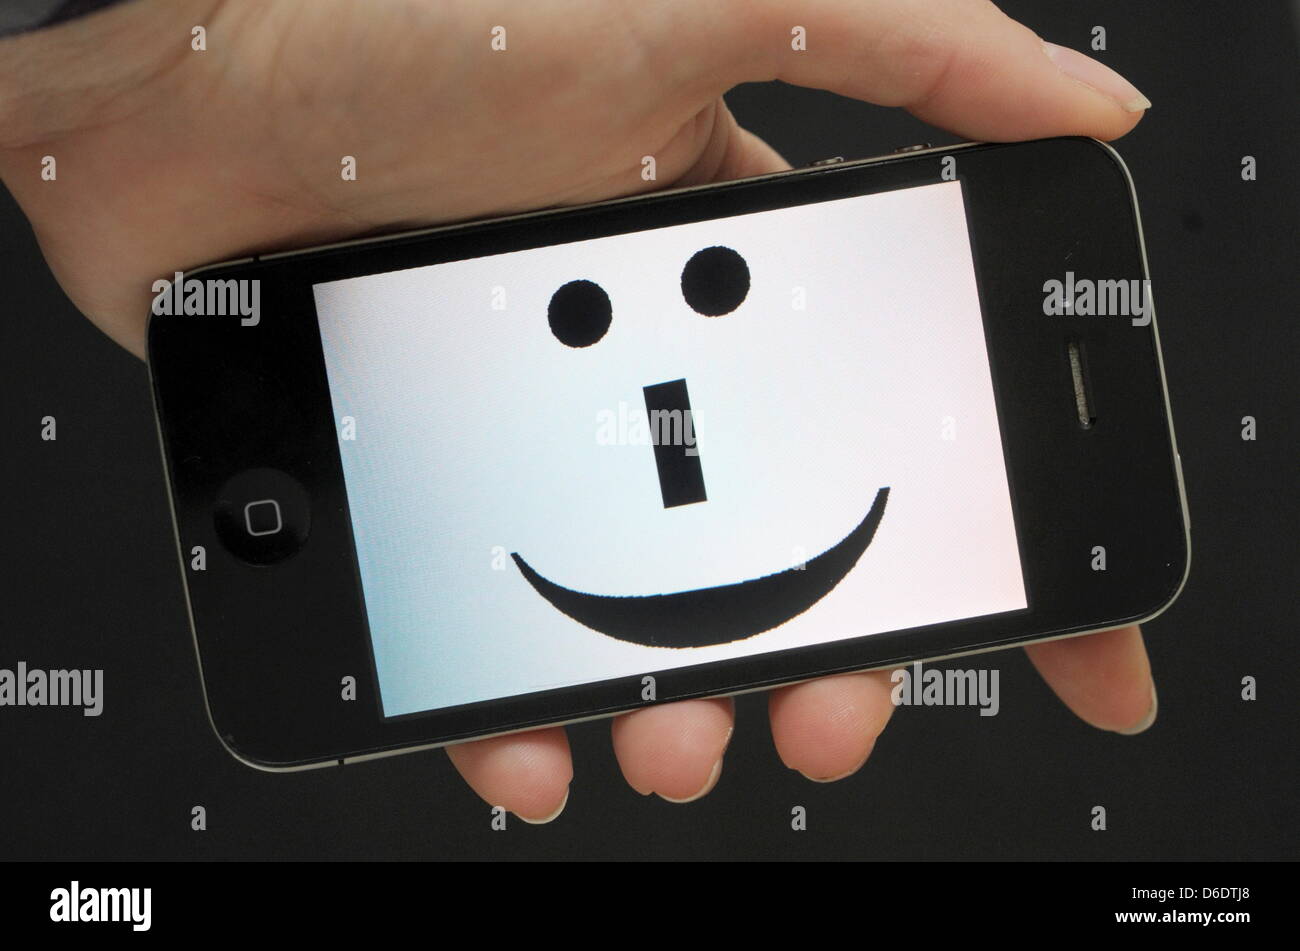 The illustration shows a smartphone with a smiley on display in Stuttgart, Germany, 12 September 2012. The worldwide known digital smiley symbole is celebrating its 30th anniversary on 19 September 2012. Smily symbole have become a common part in the culture of typewriting, i.e. in emails, chats and instant text messages. Photo: Franziska Kraufmann Stock Photo